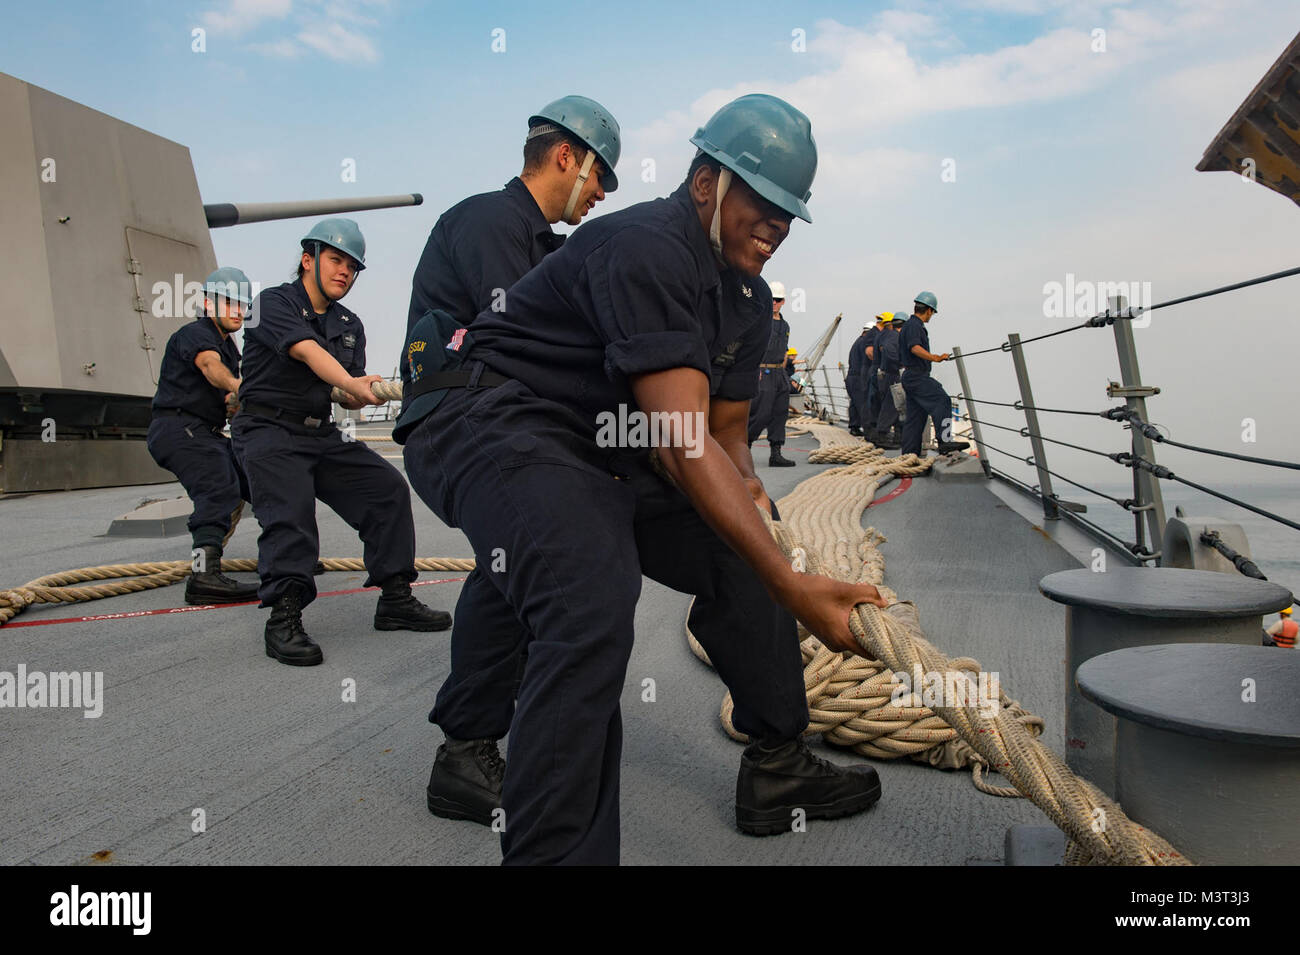 160413-N-MD297-014 ACAJUTLA, El Salvador (April 13, 2016) Sailors aboard the Arleigh Burke-class guided-missile destroyer USS Lassen (DDG 82) heave a mooring line as the ship moors in Acajutla, El Salvador for a brief stop for fuel (BSF). Lassen is currently underway in support of Operation Martillo, a joint operation with the U.S. Coast Guard and partner nations within the 4th Fleet area of responsibility. Operation Martillo is being led by Joint Interagency Task Force South, in support of U.S. Southern Command. (U.S. Navy photo by Mass Communication Specialist 2nd Class Huey D. Younger Jr./R Stock Photo